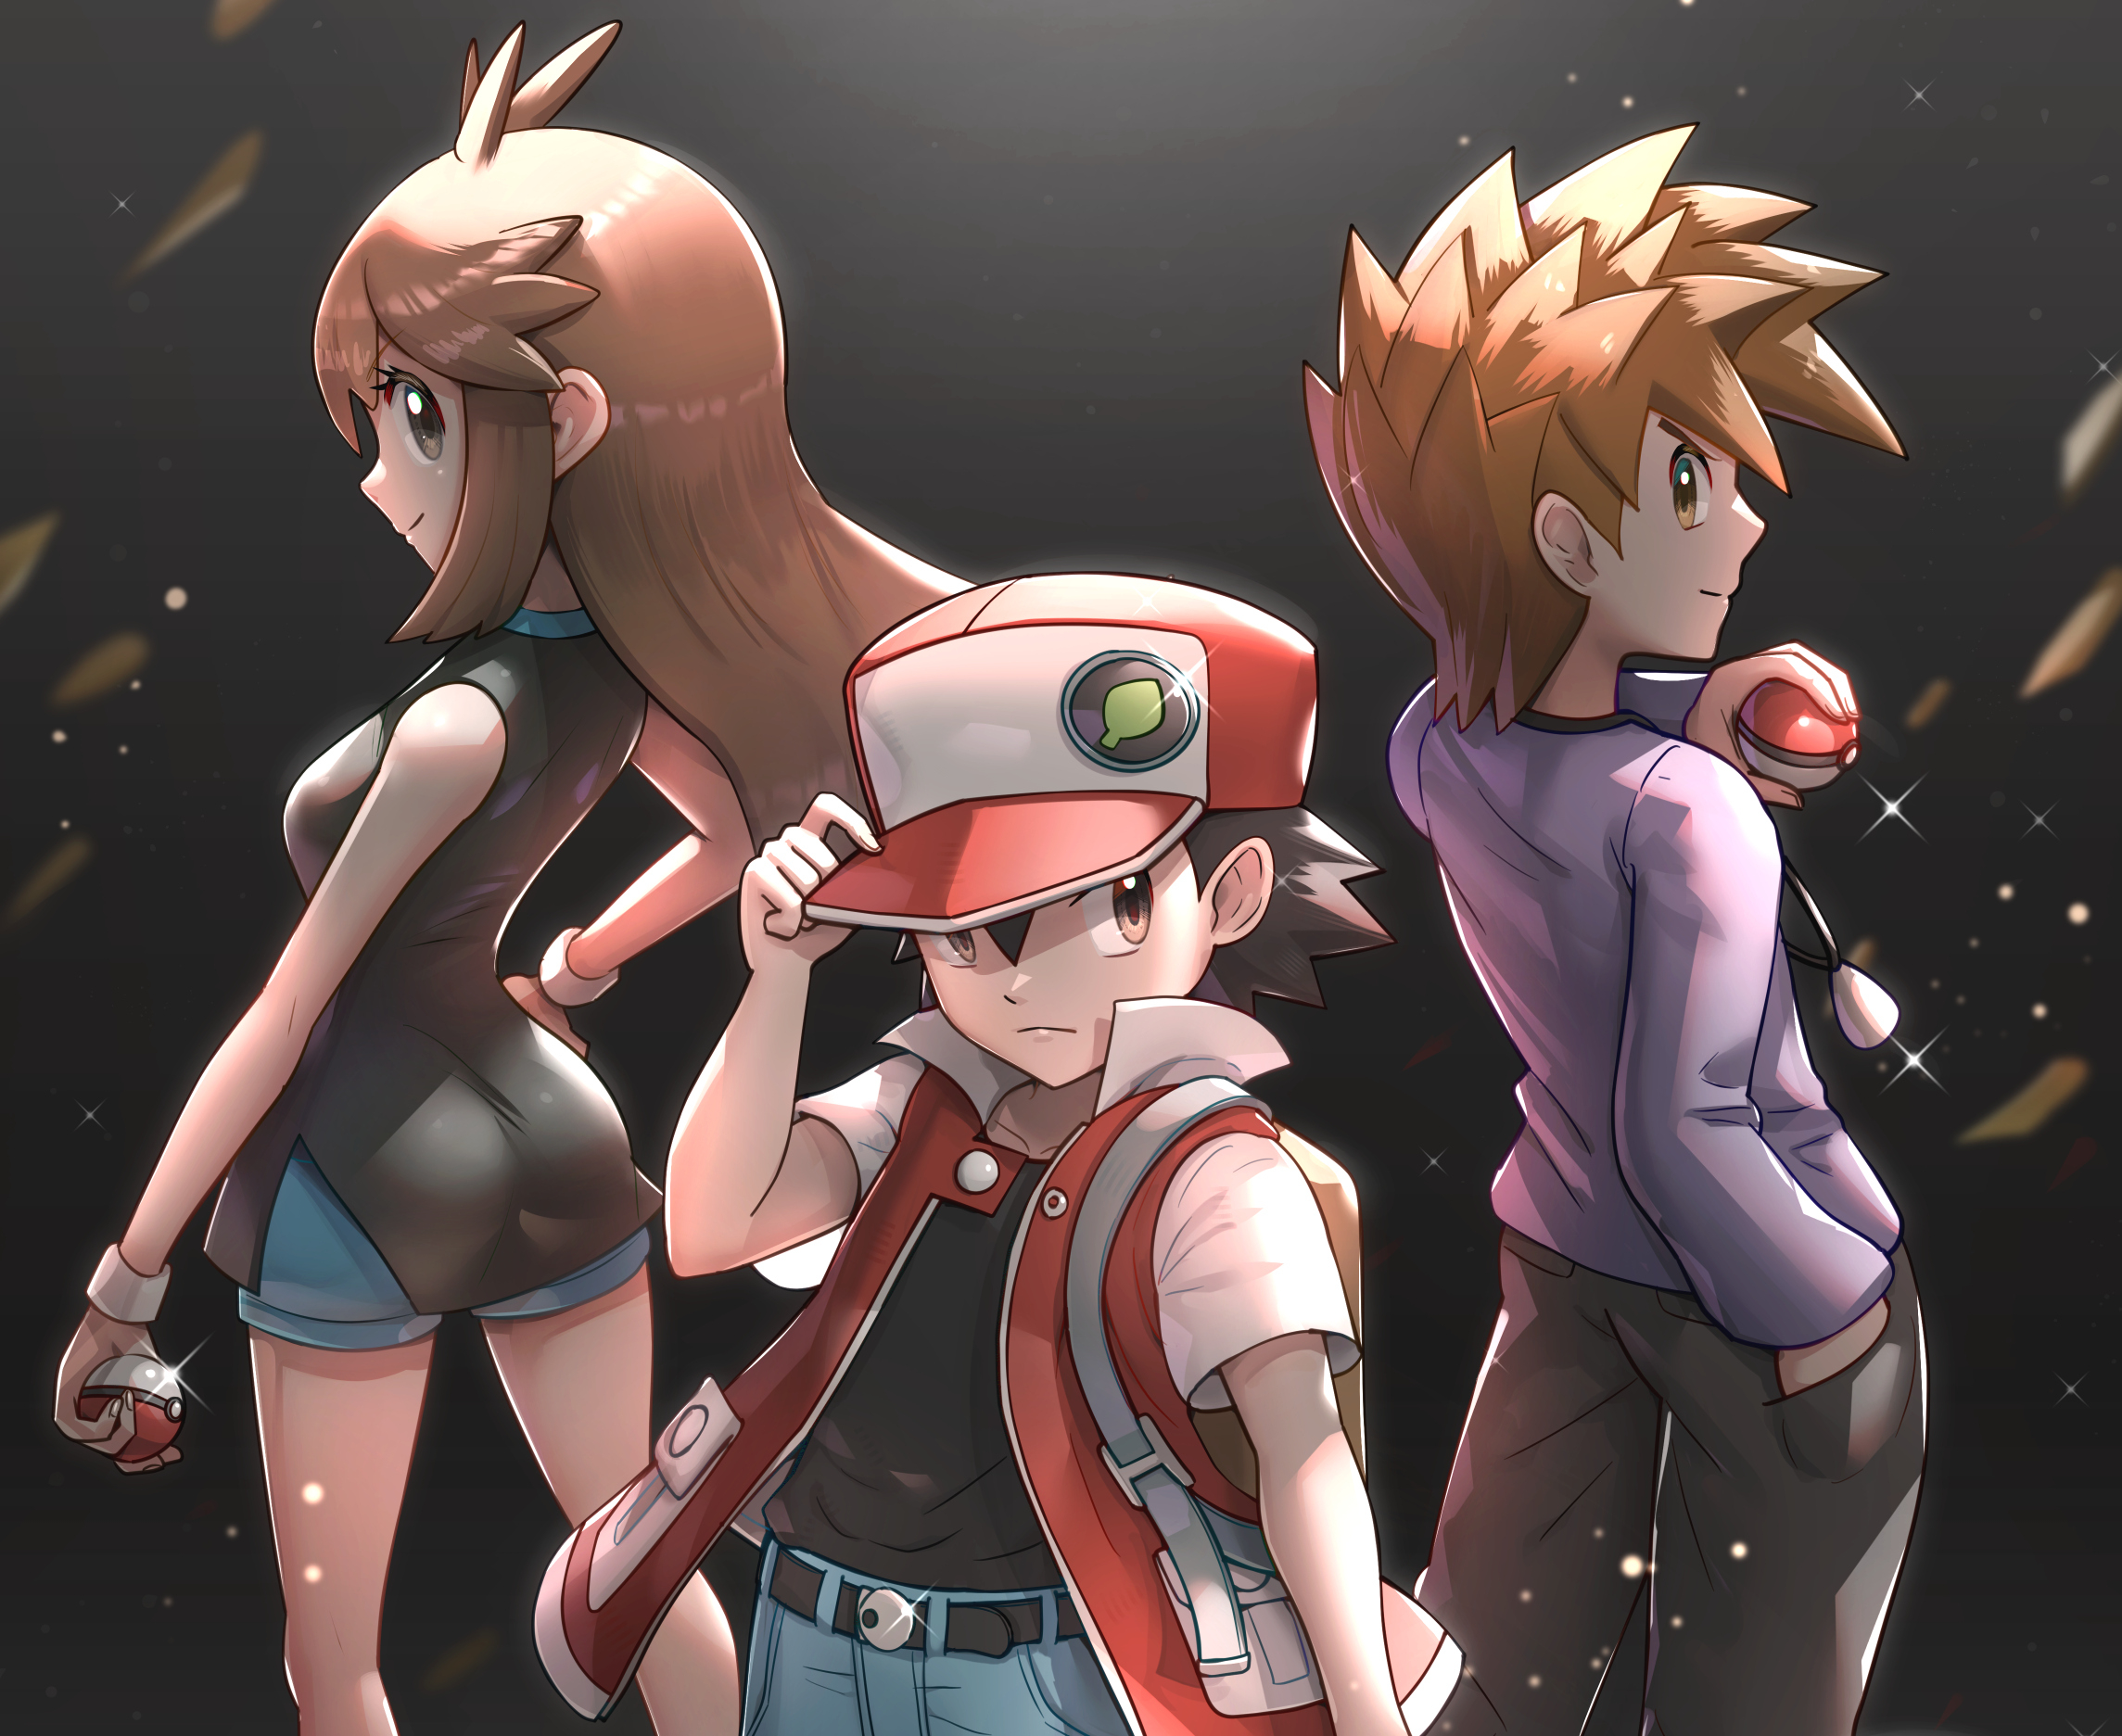 Red (Pokémon) - Pokémon Red & Green - Mobile Wallpaper by ngg